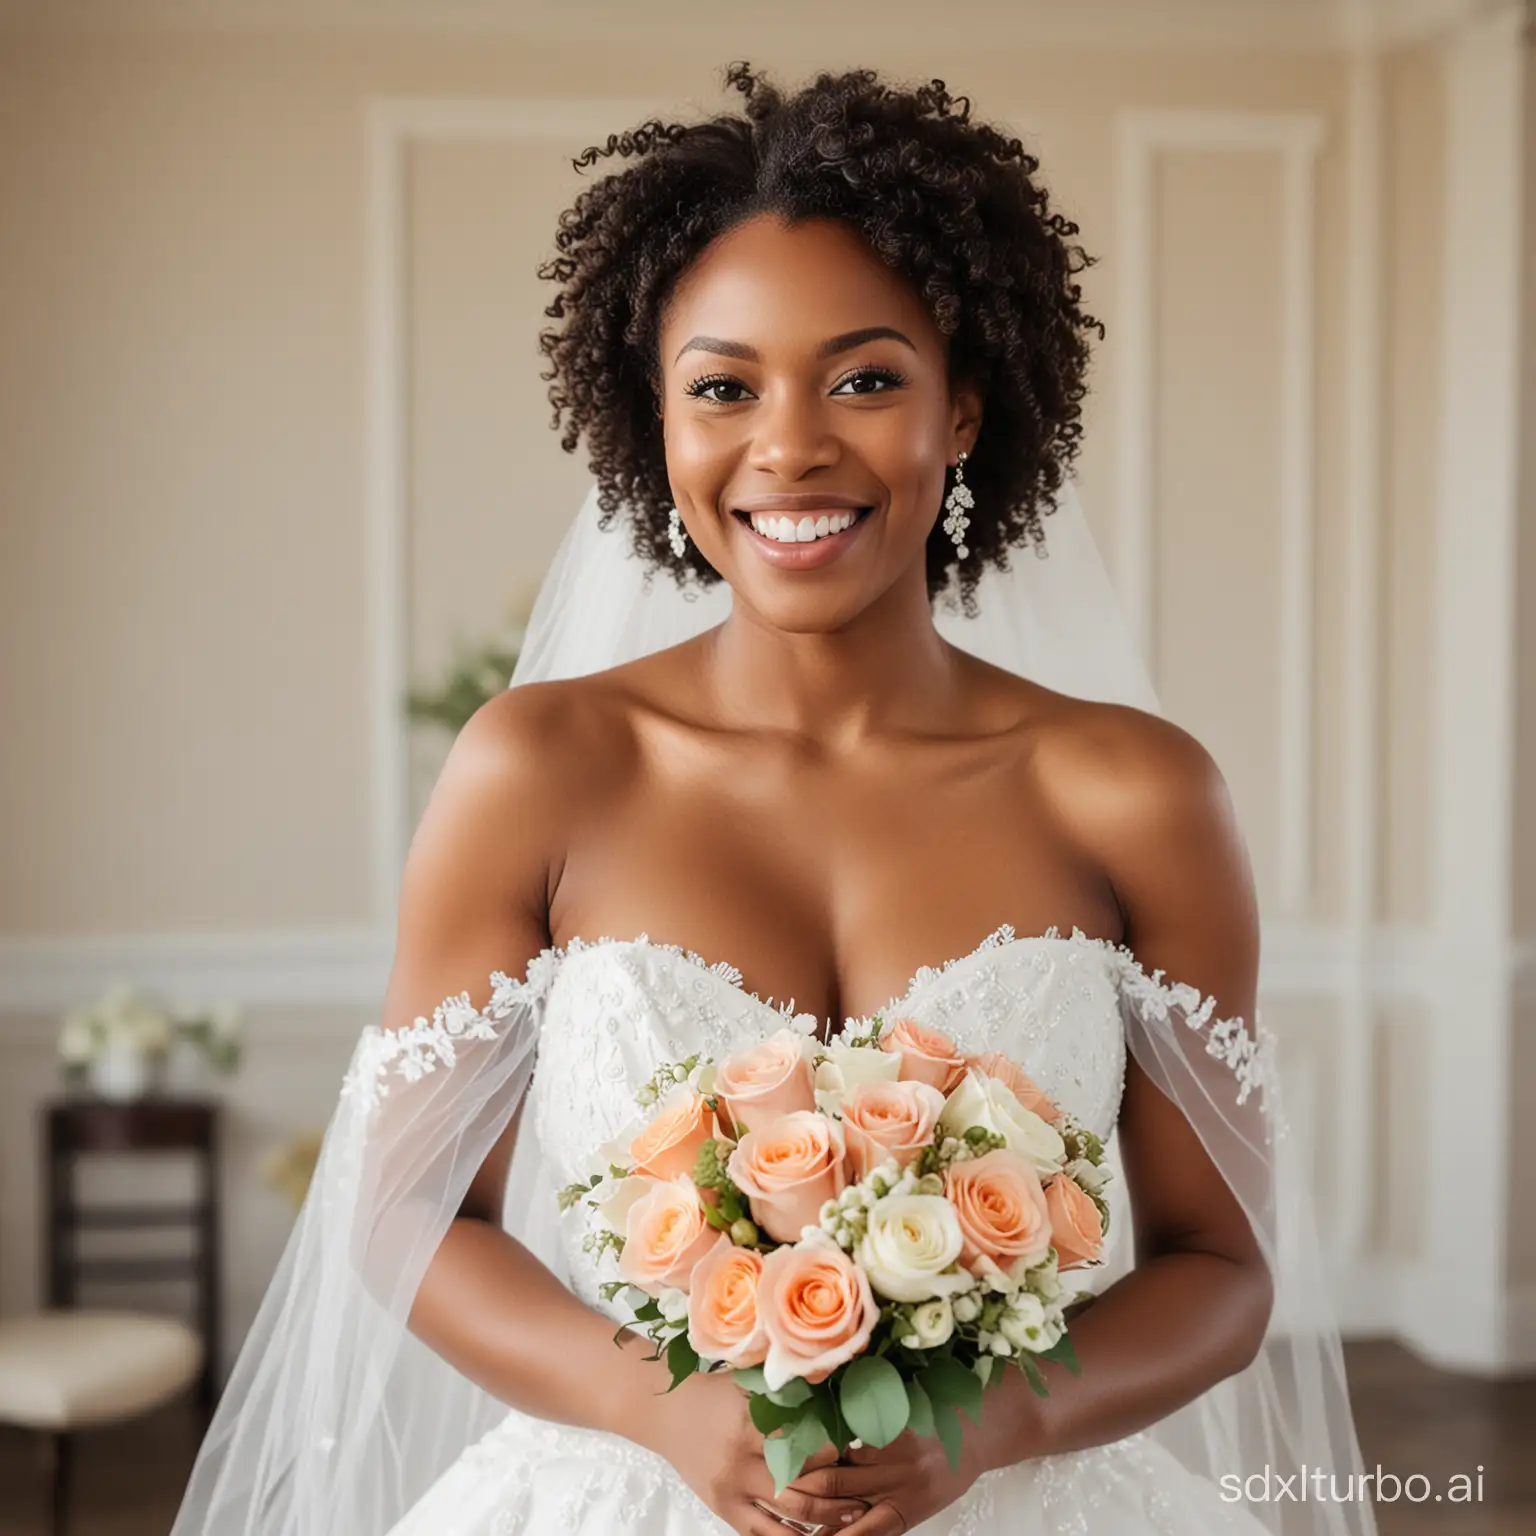 cute adult black female smiling while dressed in a wedding gown, holding a bouquet of flowers. The background should depict a joyful wedding reception atmosphere.